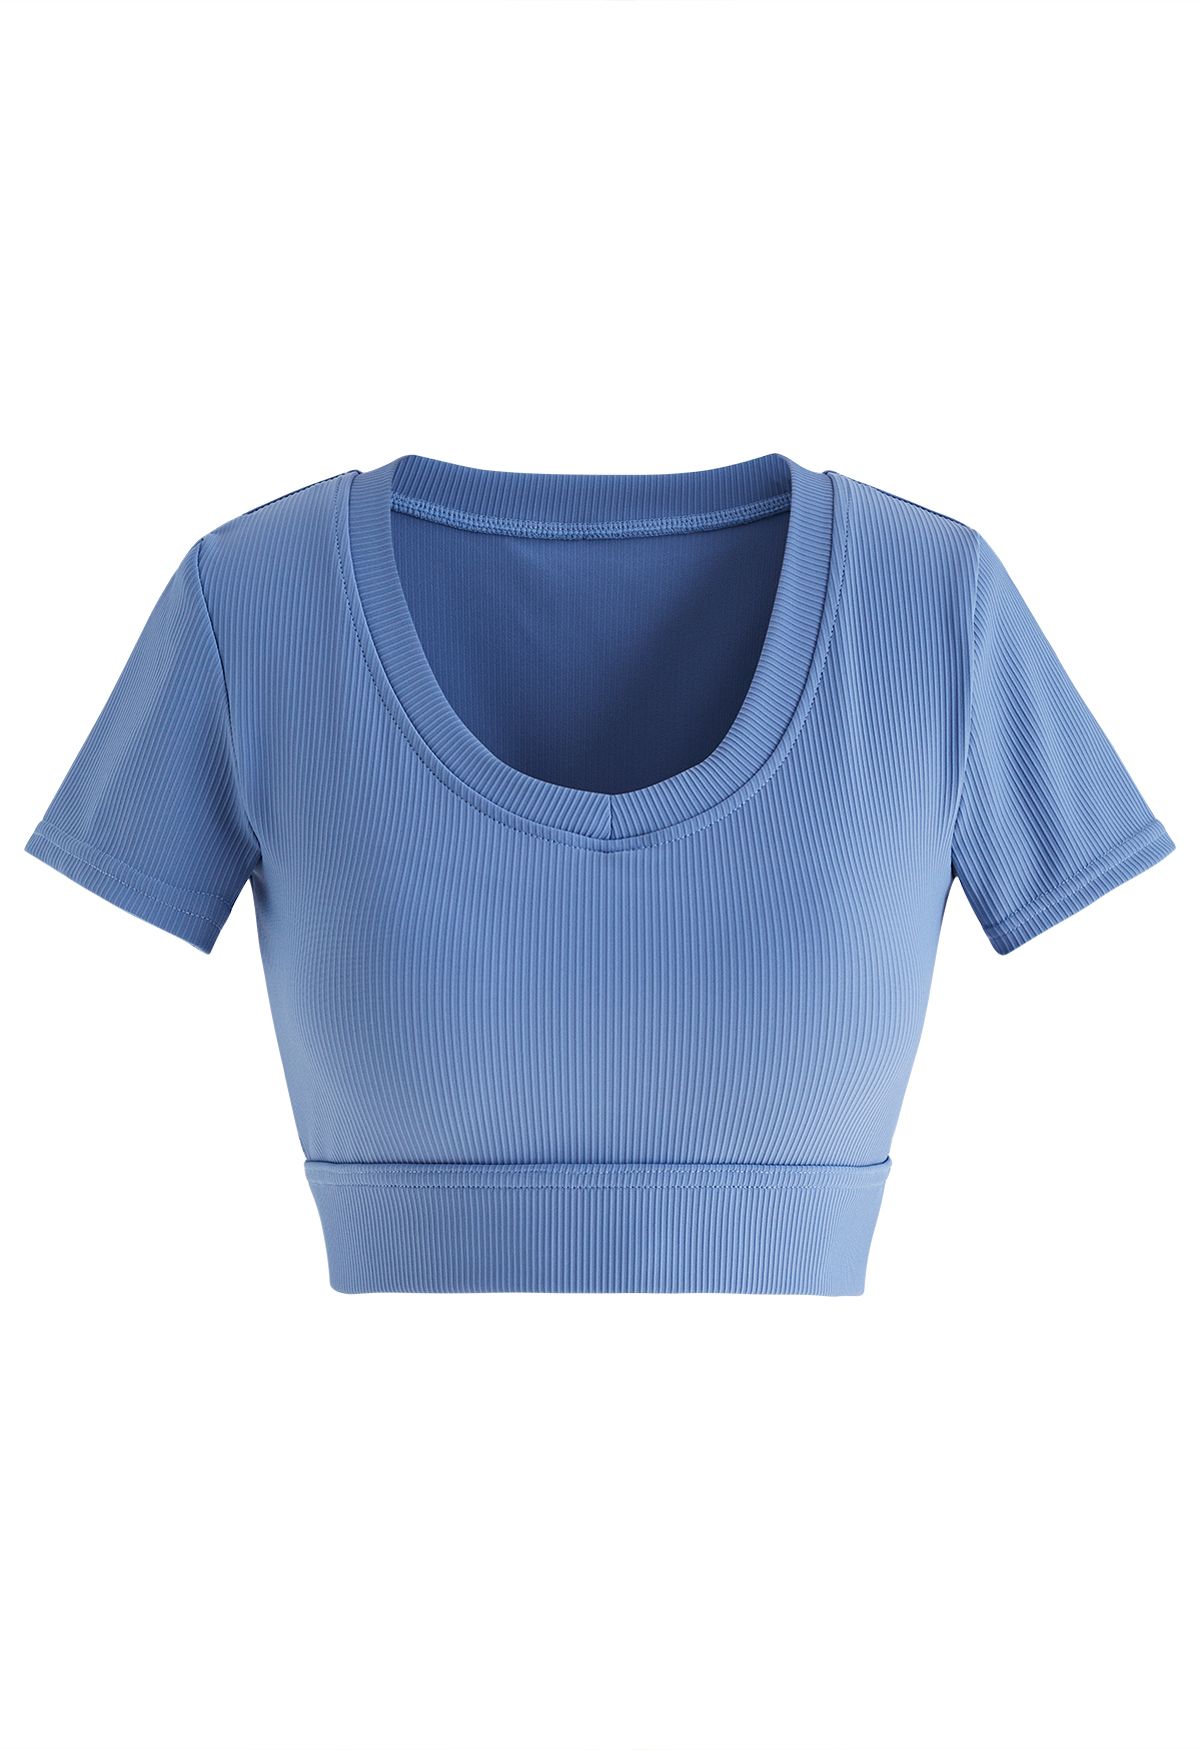 Crew Neck Ribbed Fitted Top in Blue - Retro, Indie and Unique Fashion